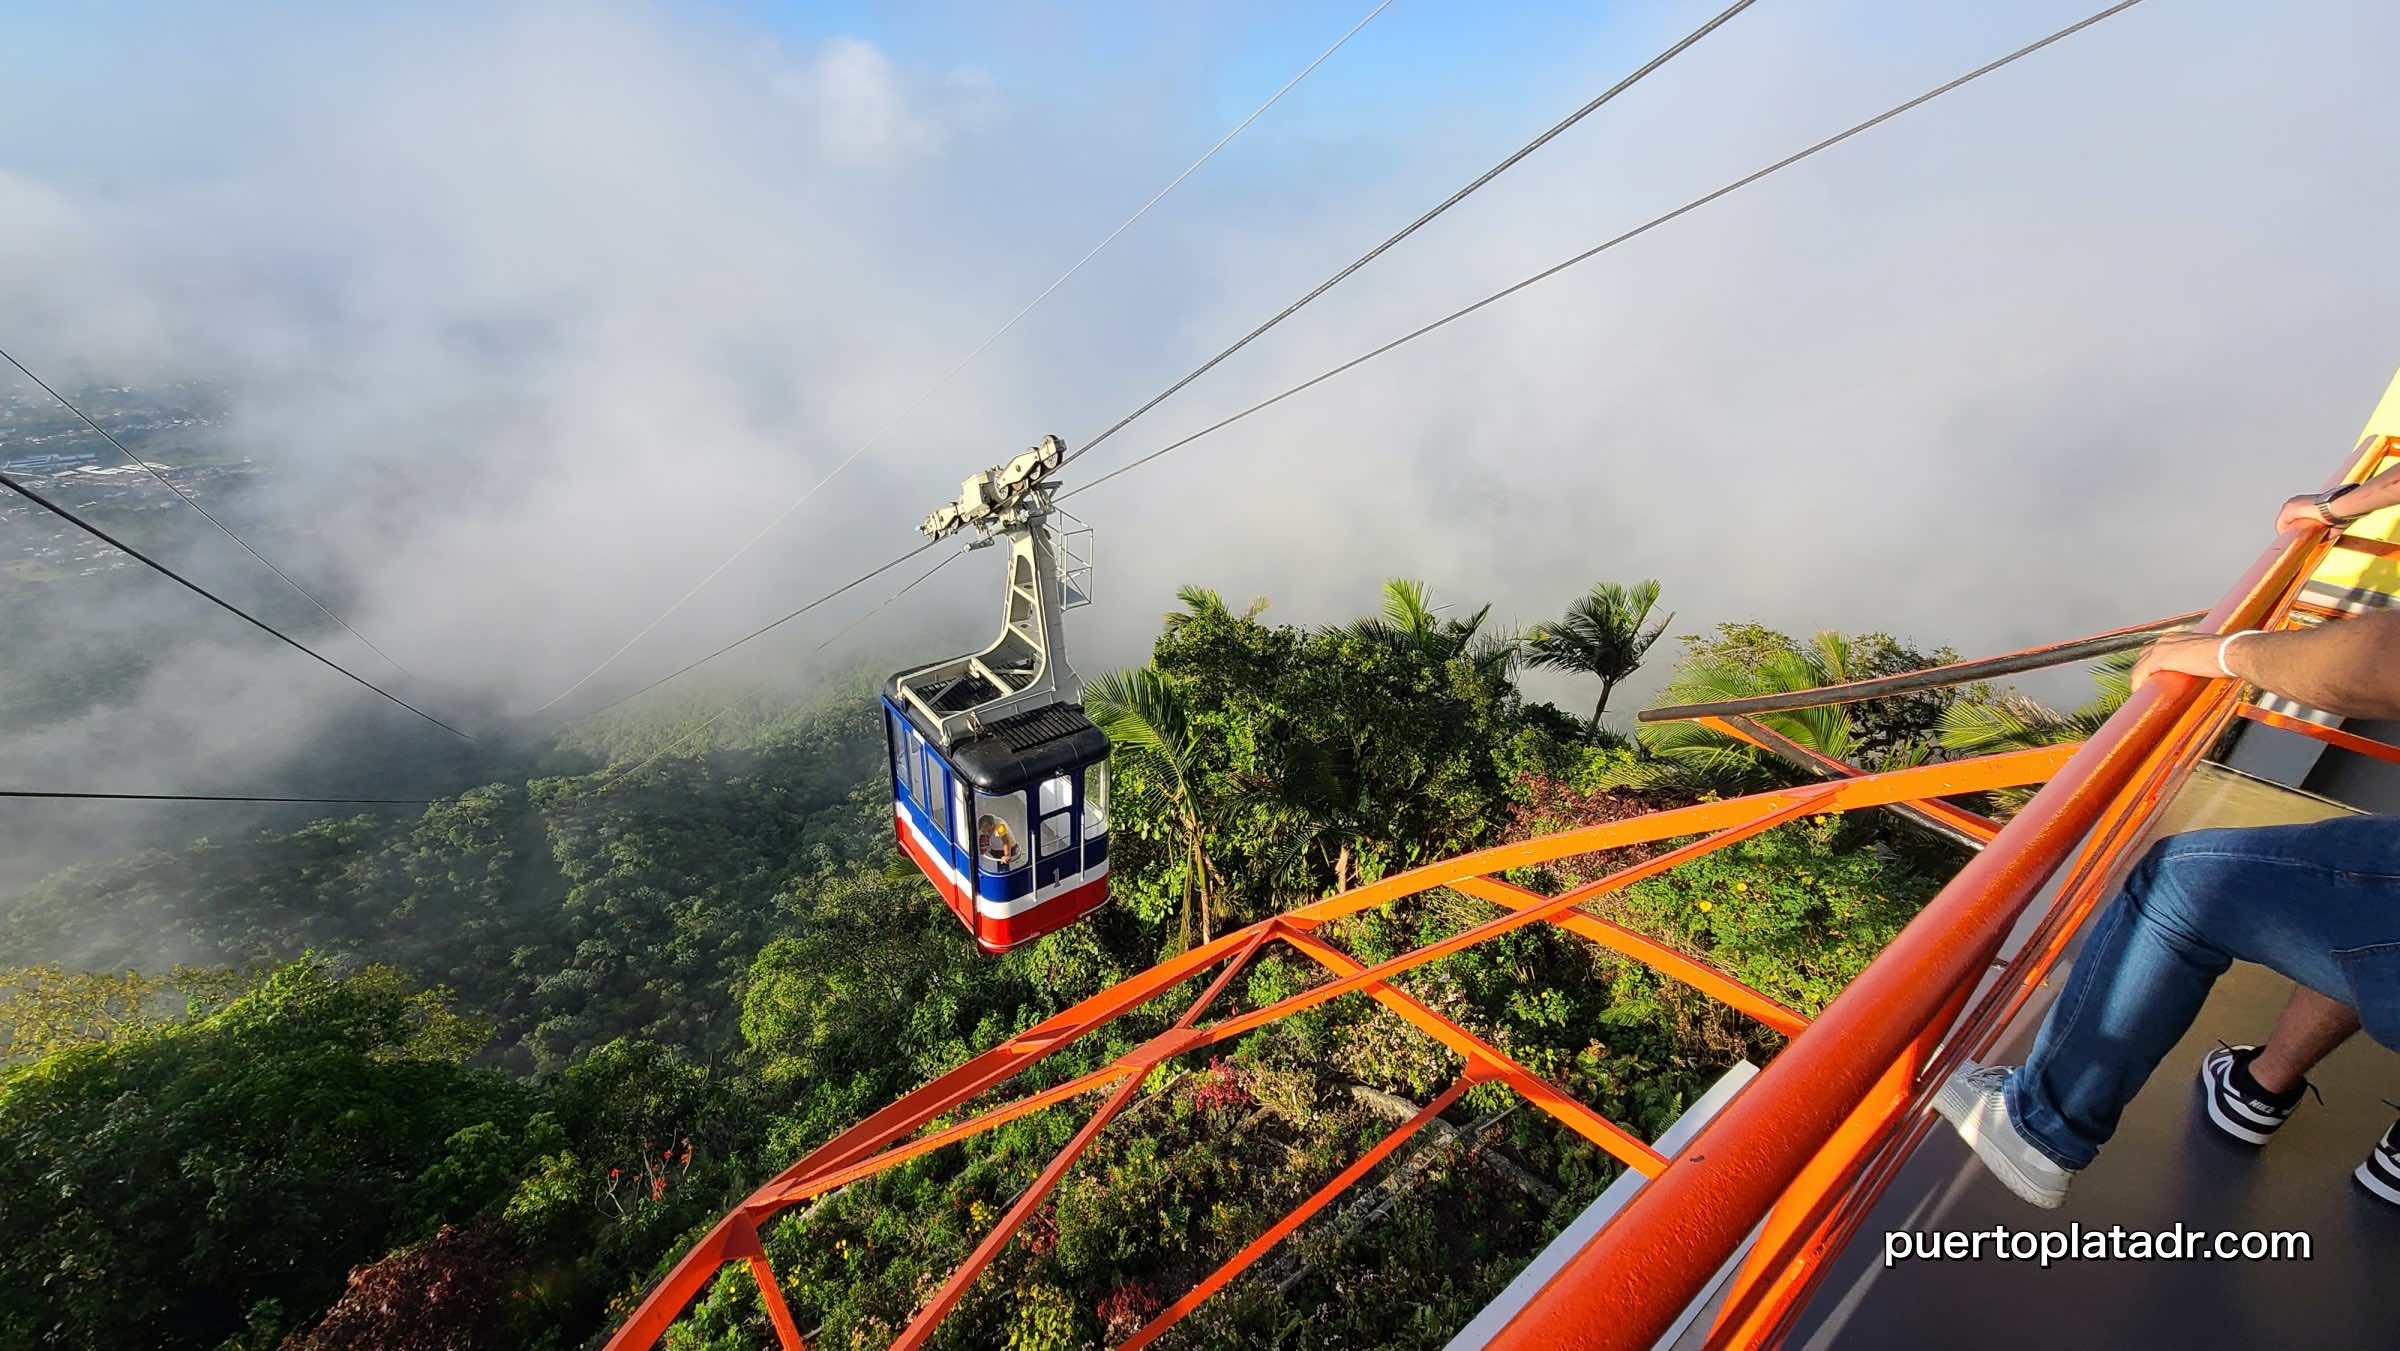 Cable Car excursion, one of the Virgin Voyages Puerto Plata Excursions